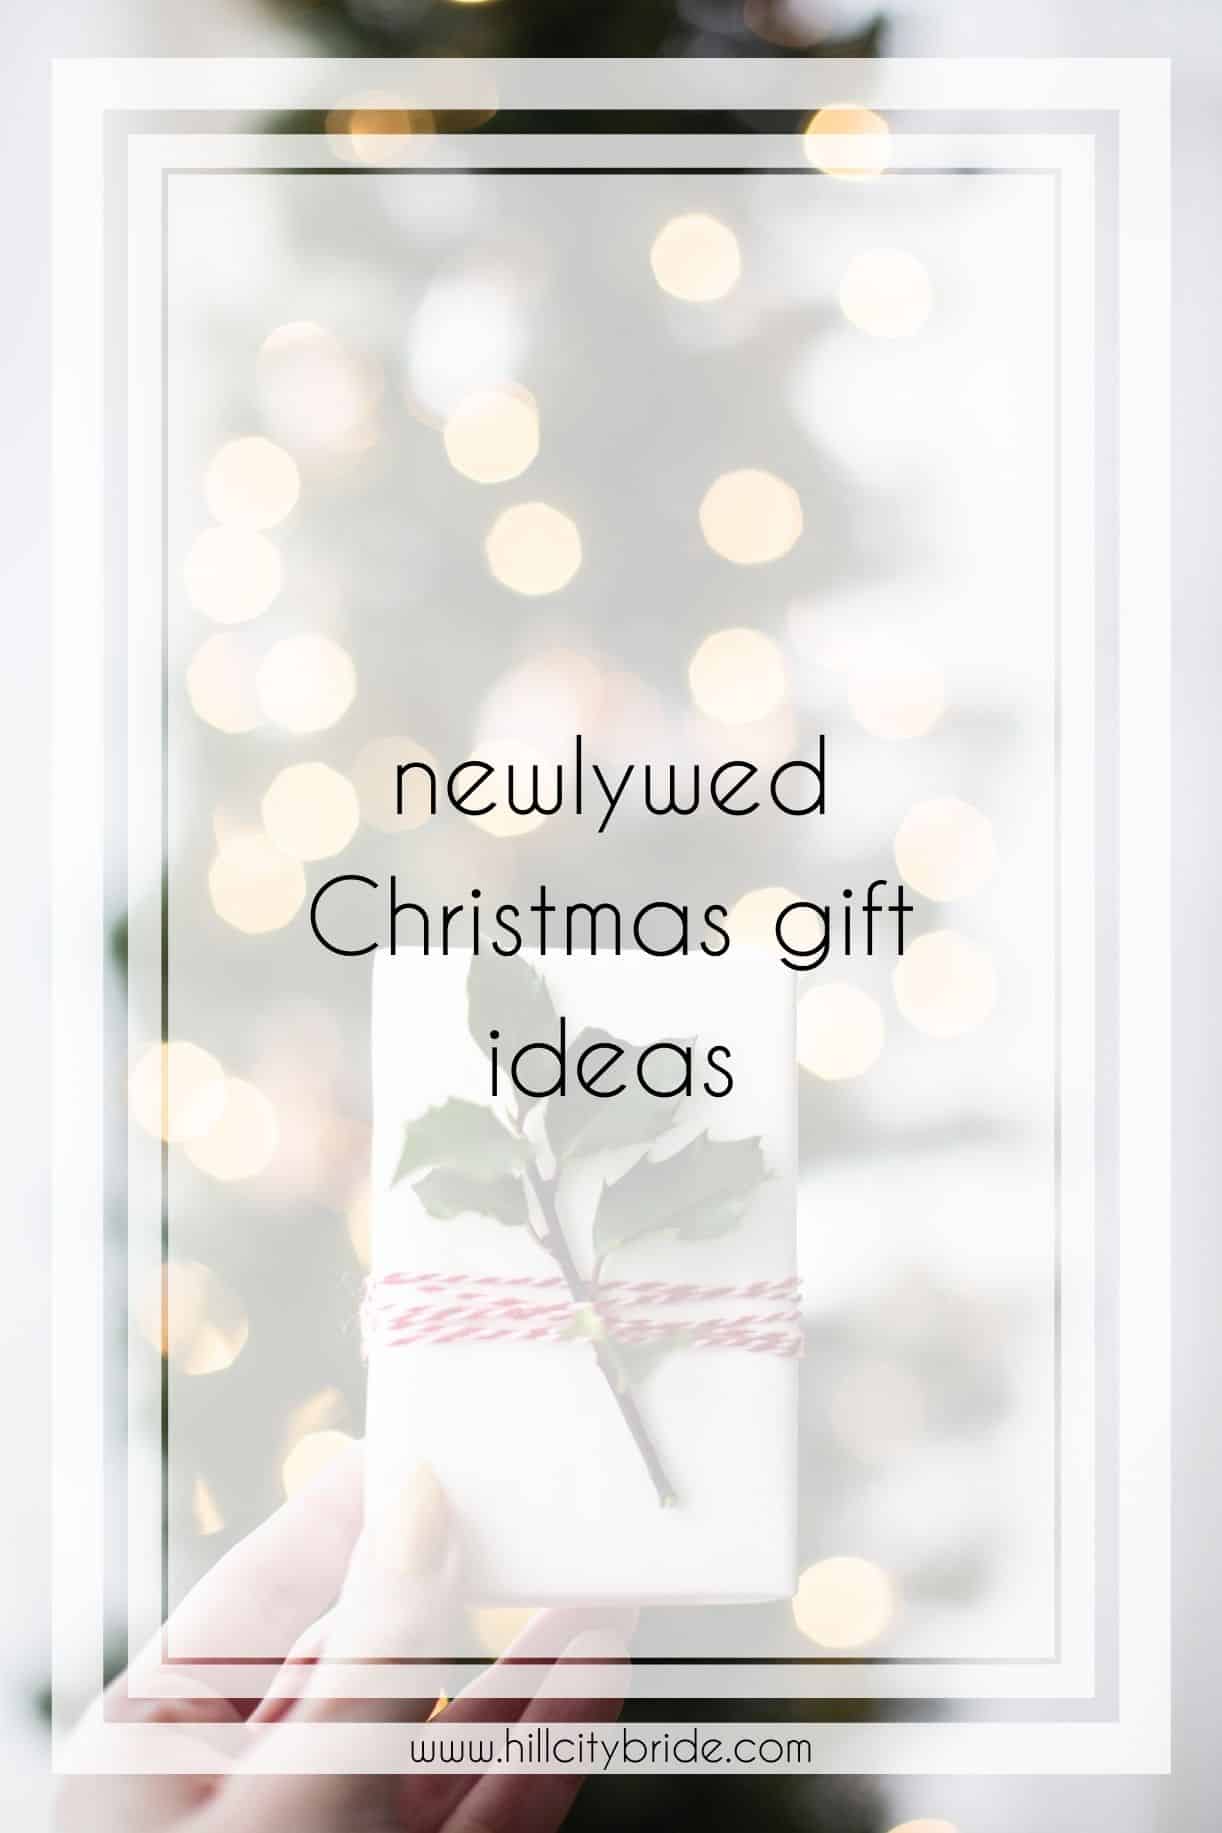 https://hillcitybride.com/wp-content/uploads/2021/12/18-43468-post/Newlywed-Gifts-for-Christmas-Ideas.jpg